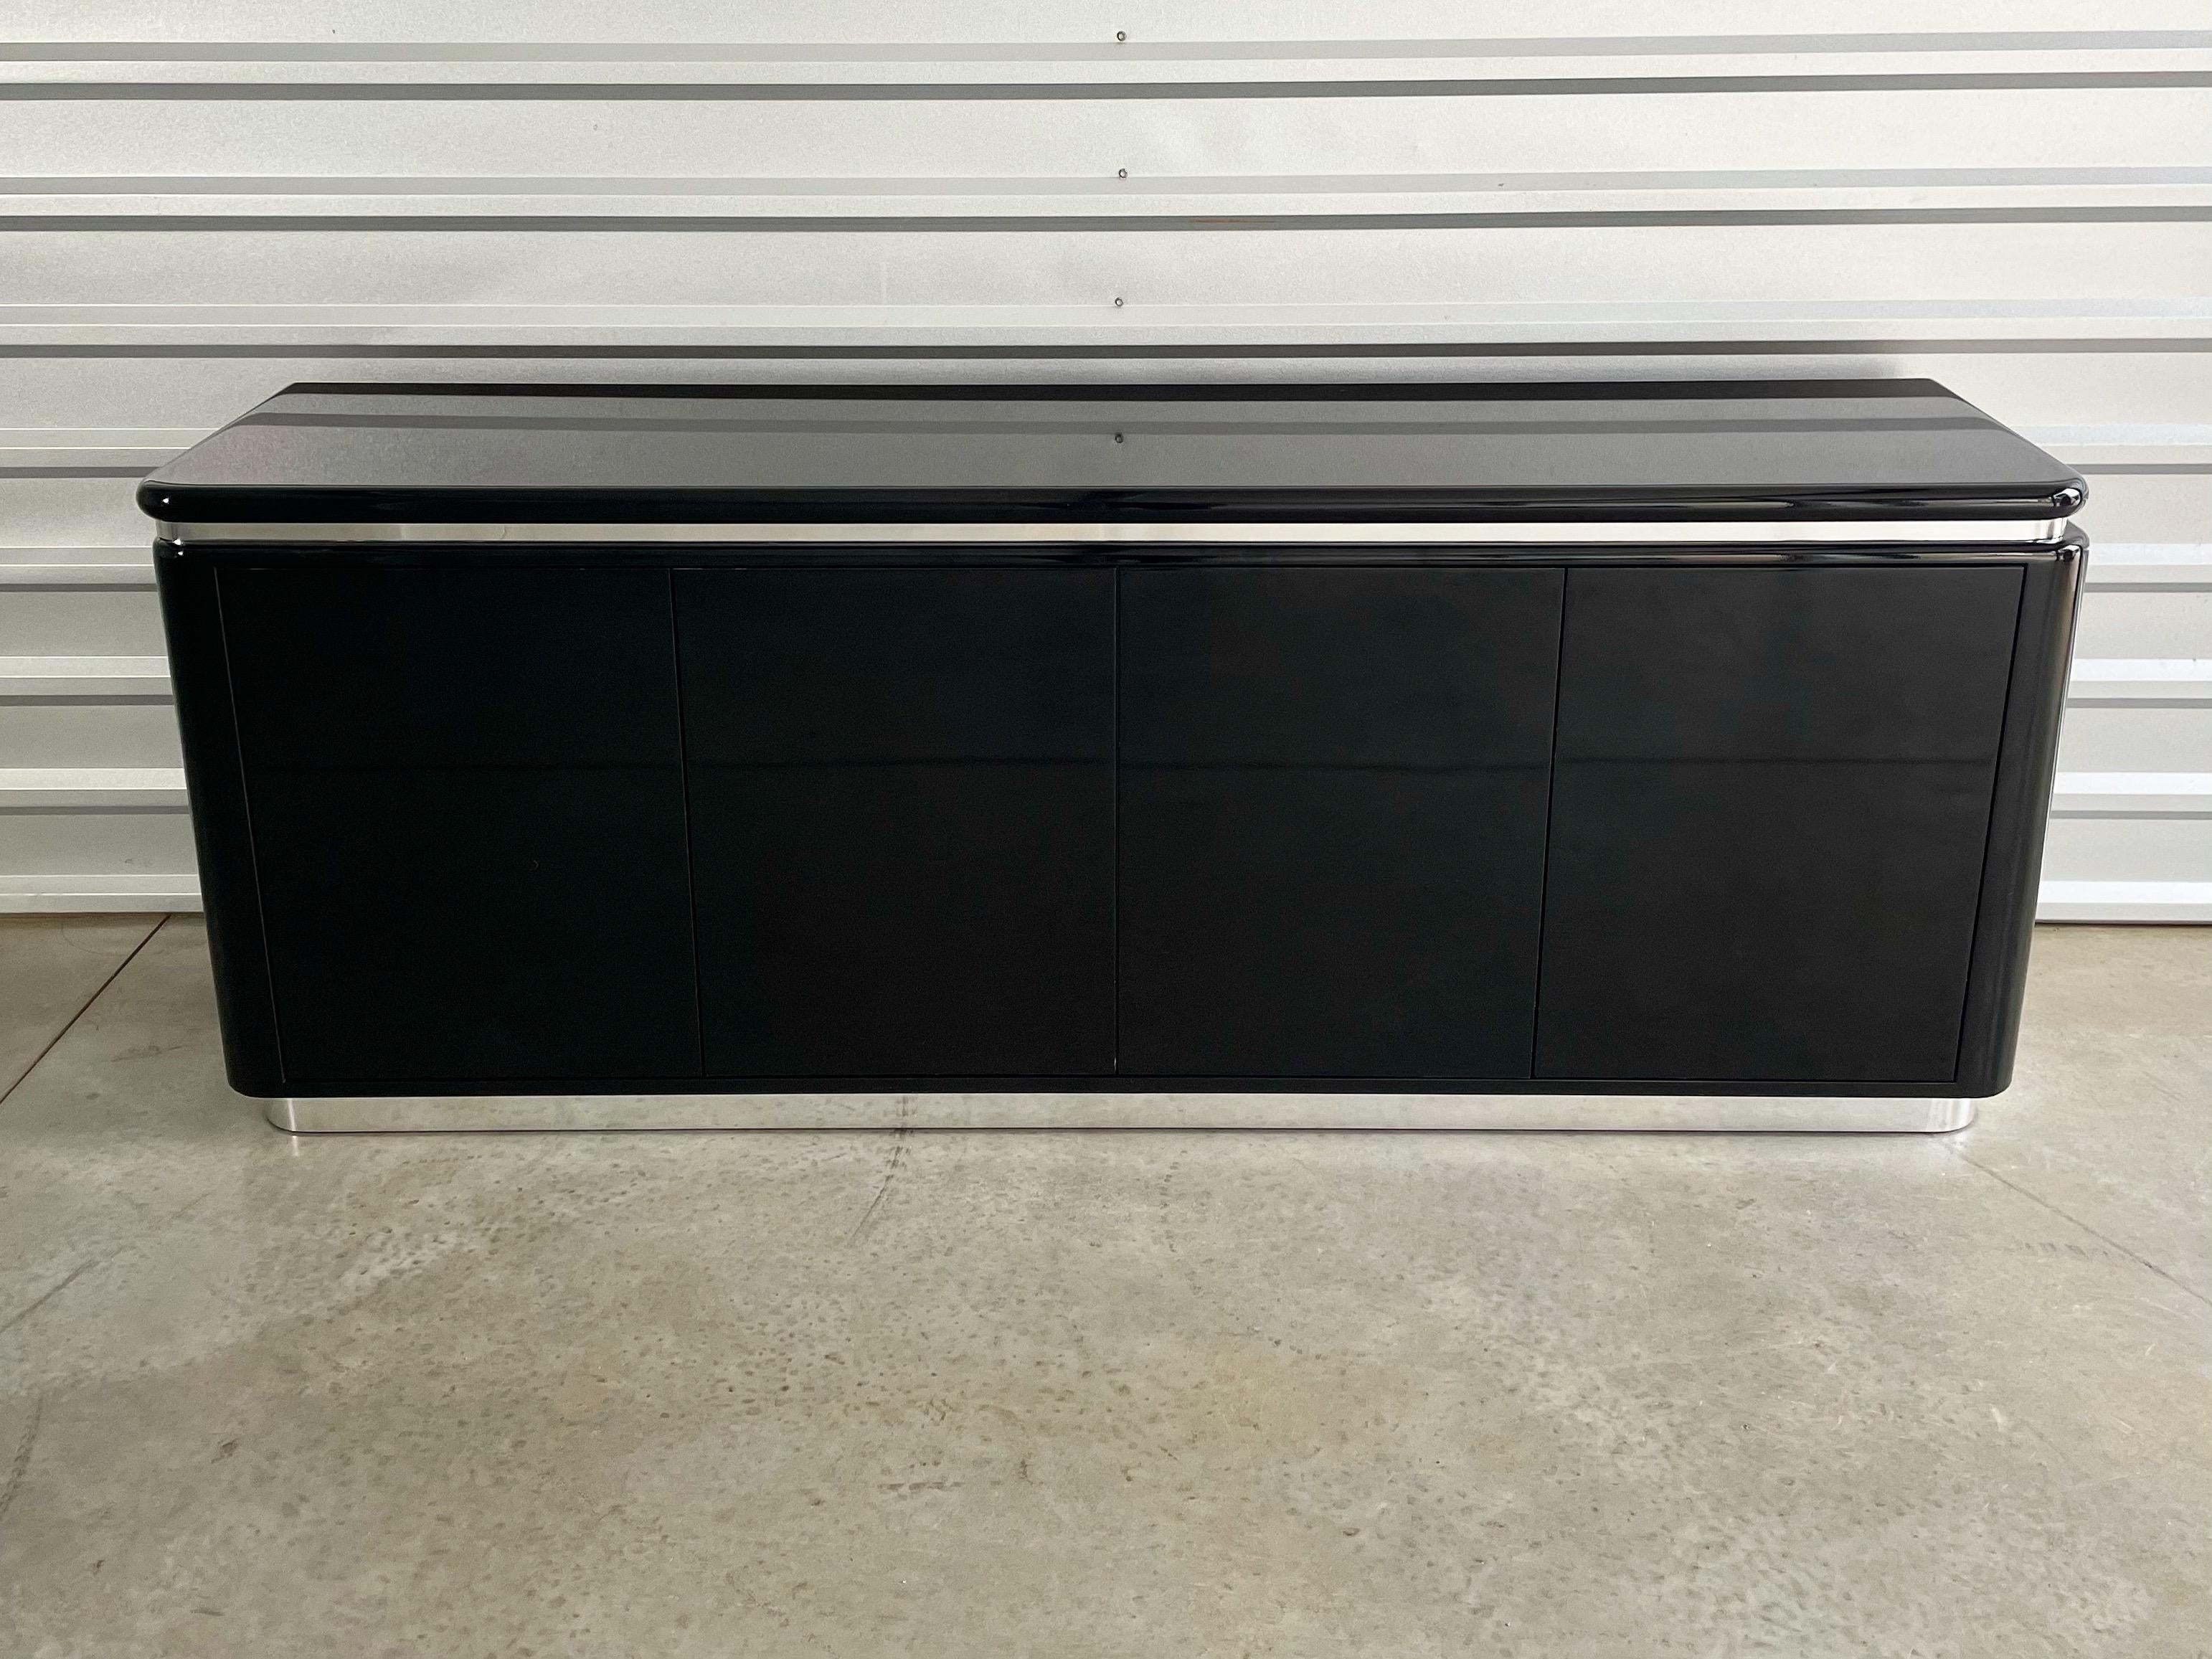 Black lacquer and chrome modernist credenza in the manner of Milo Baughman, circa 1970s. Exquisite design and craftsmanship. Two sets of double cabinet doors open to reveal drawers and shelved storage. Black and white interior. Chrome banding detail